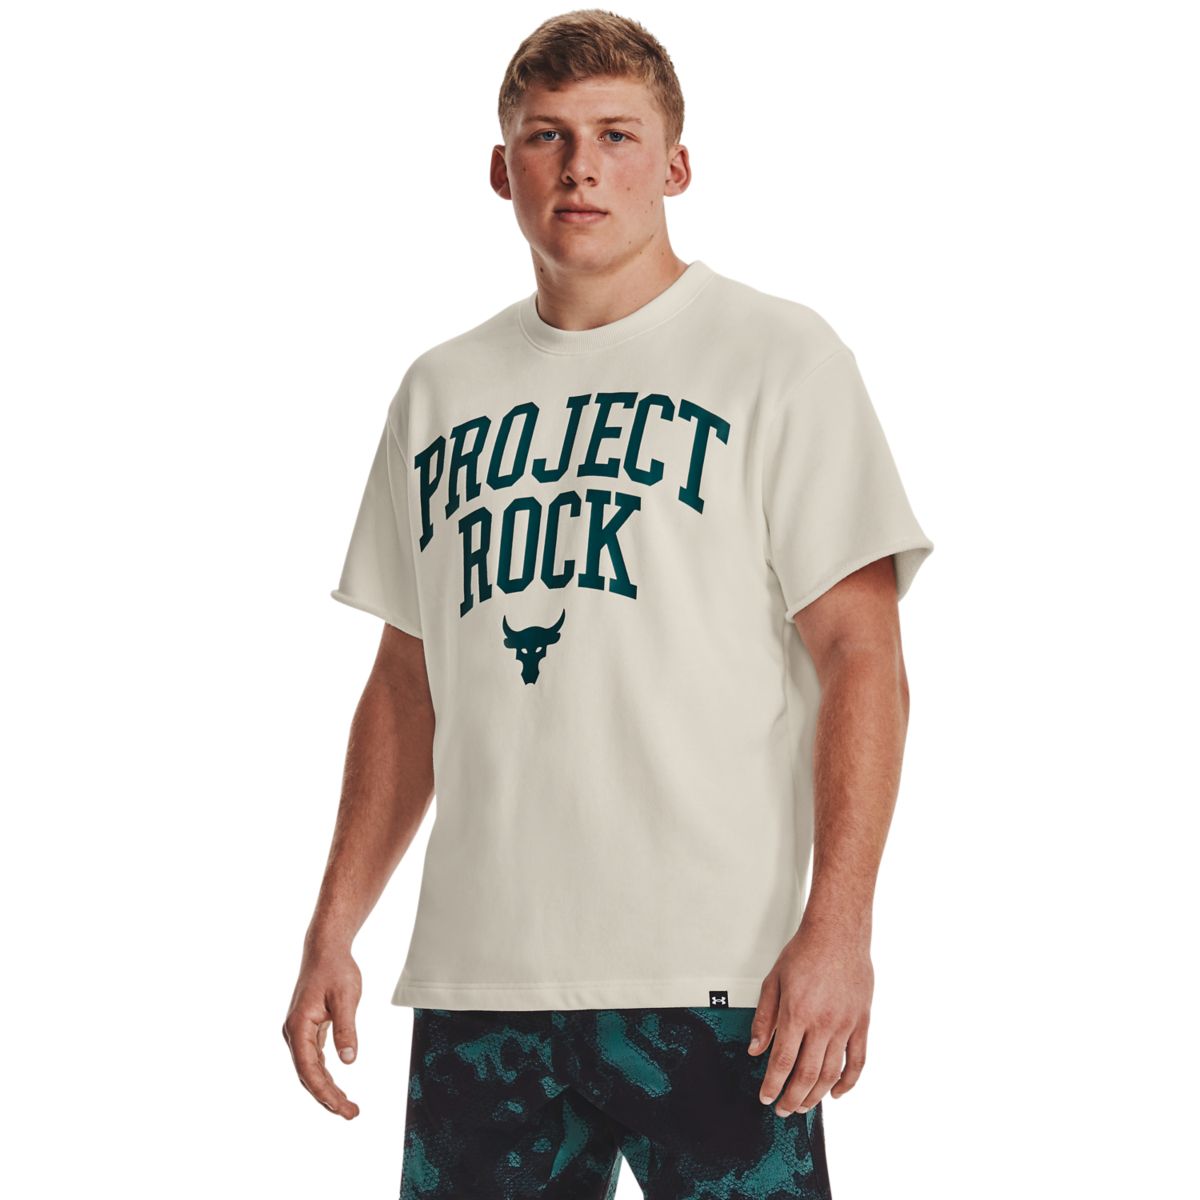 Under Armour Project Rock T-Shirt